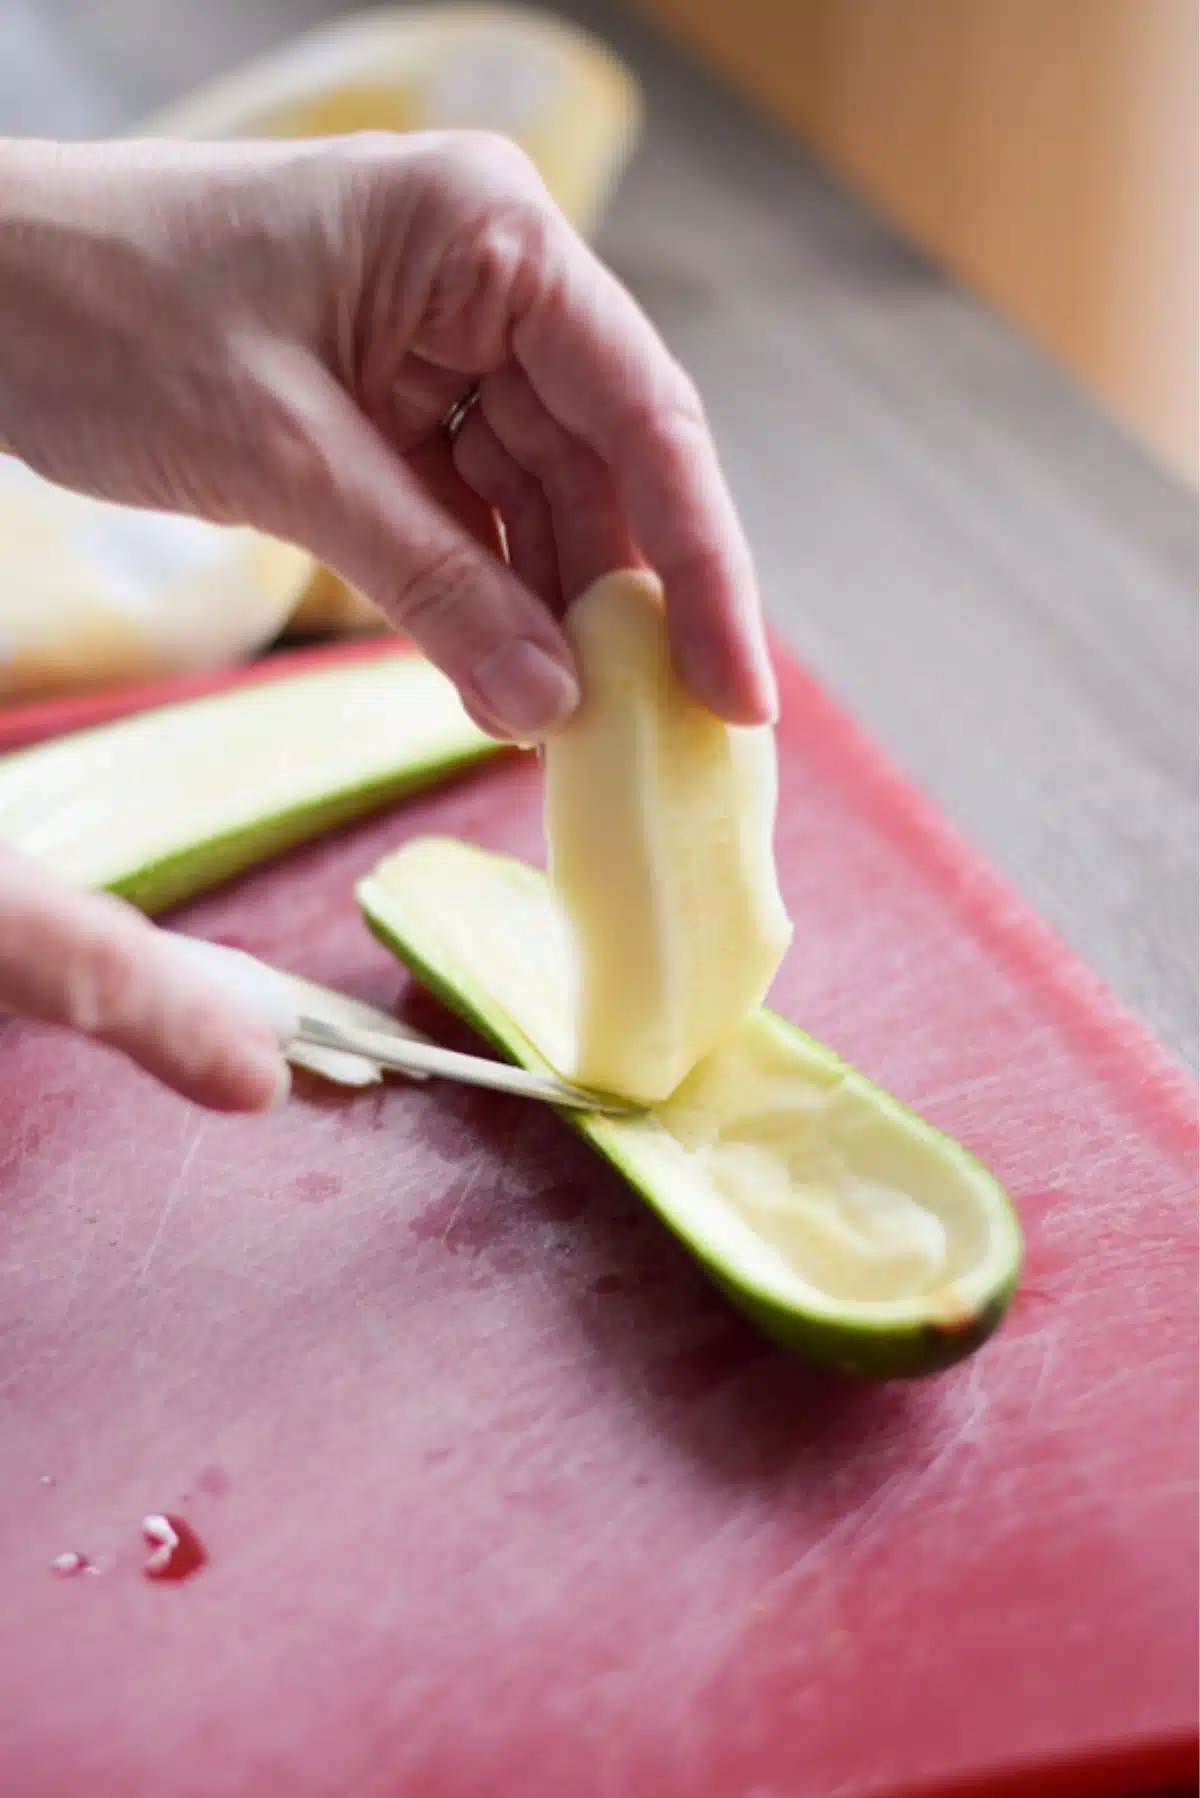 A woman's hand cutting into a zucchini cut lengthwise and removing the flesh